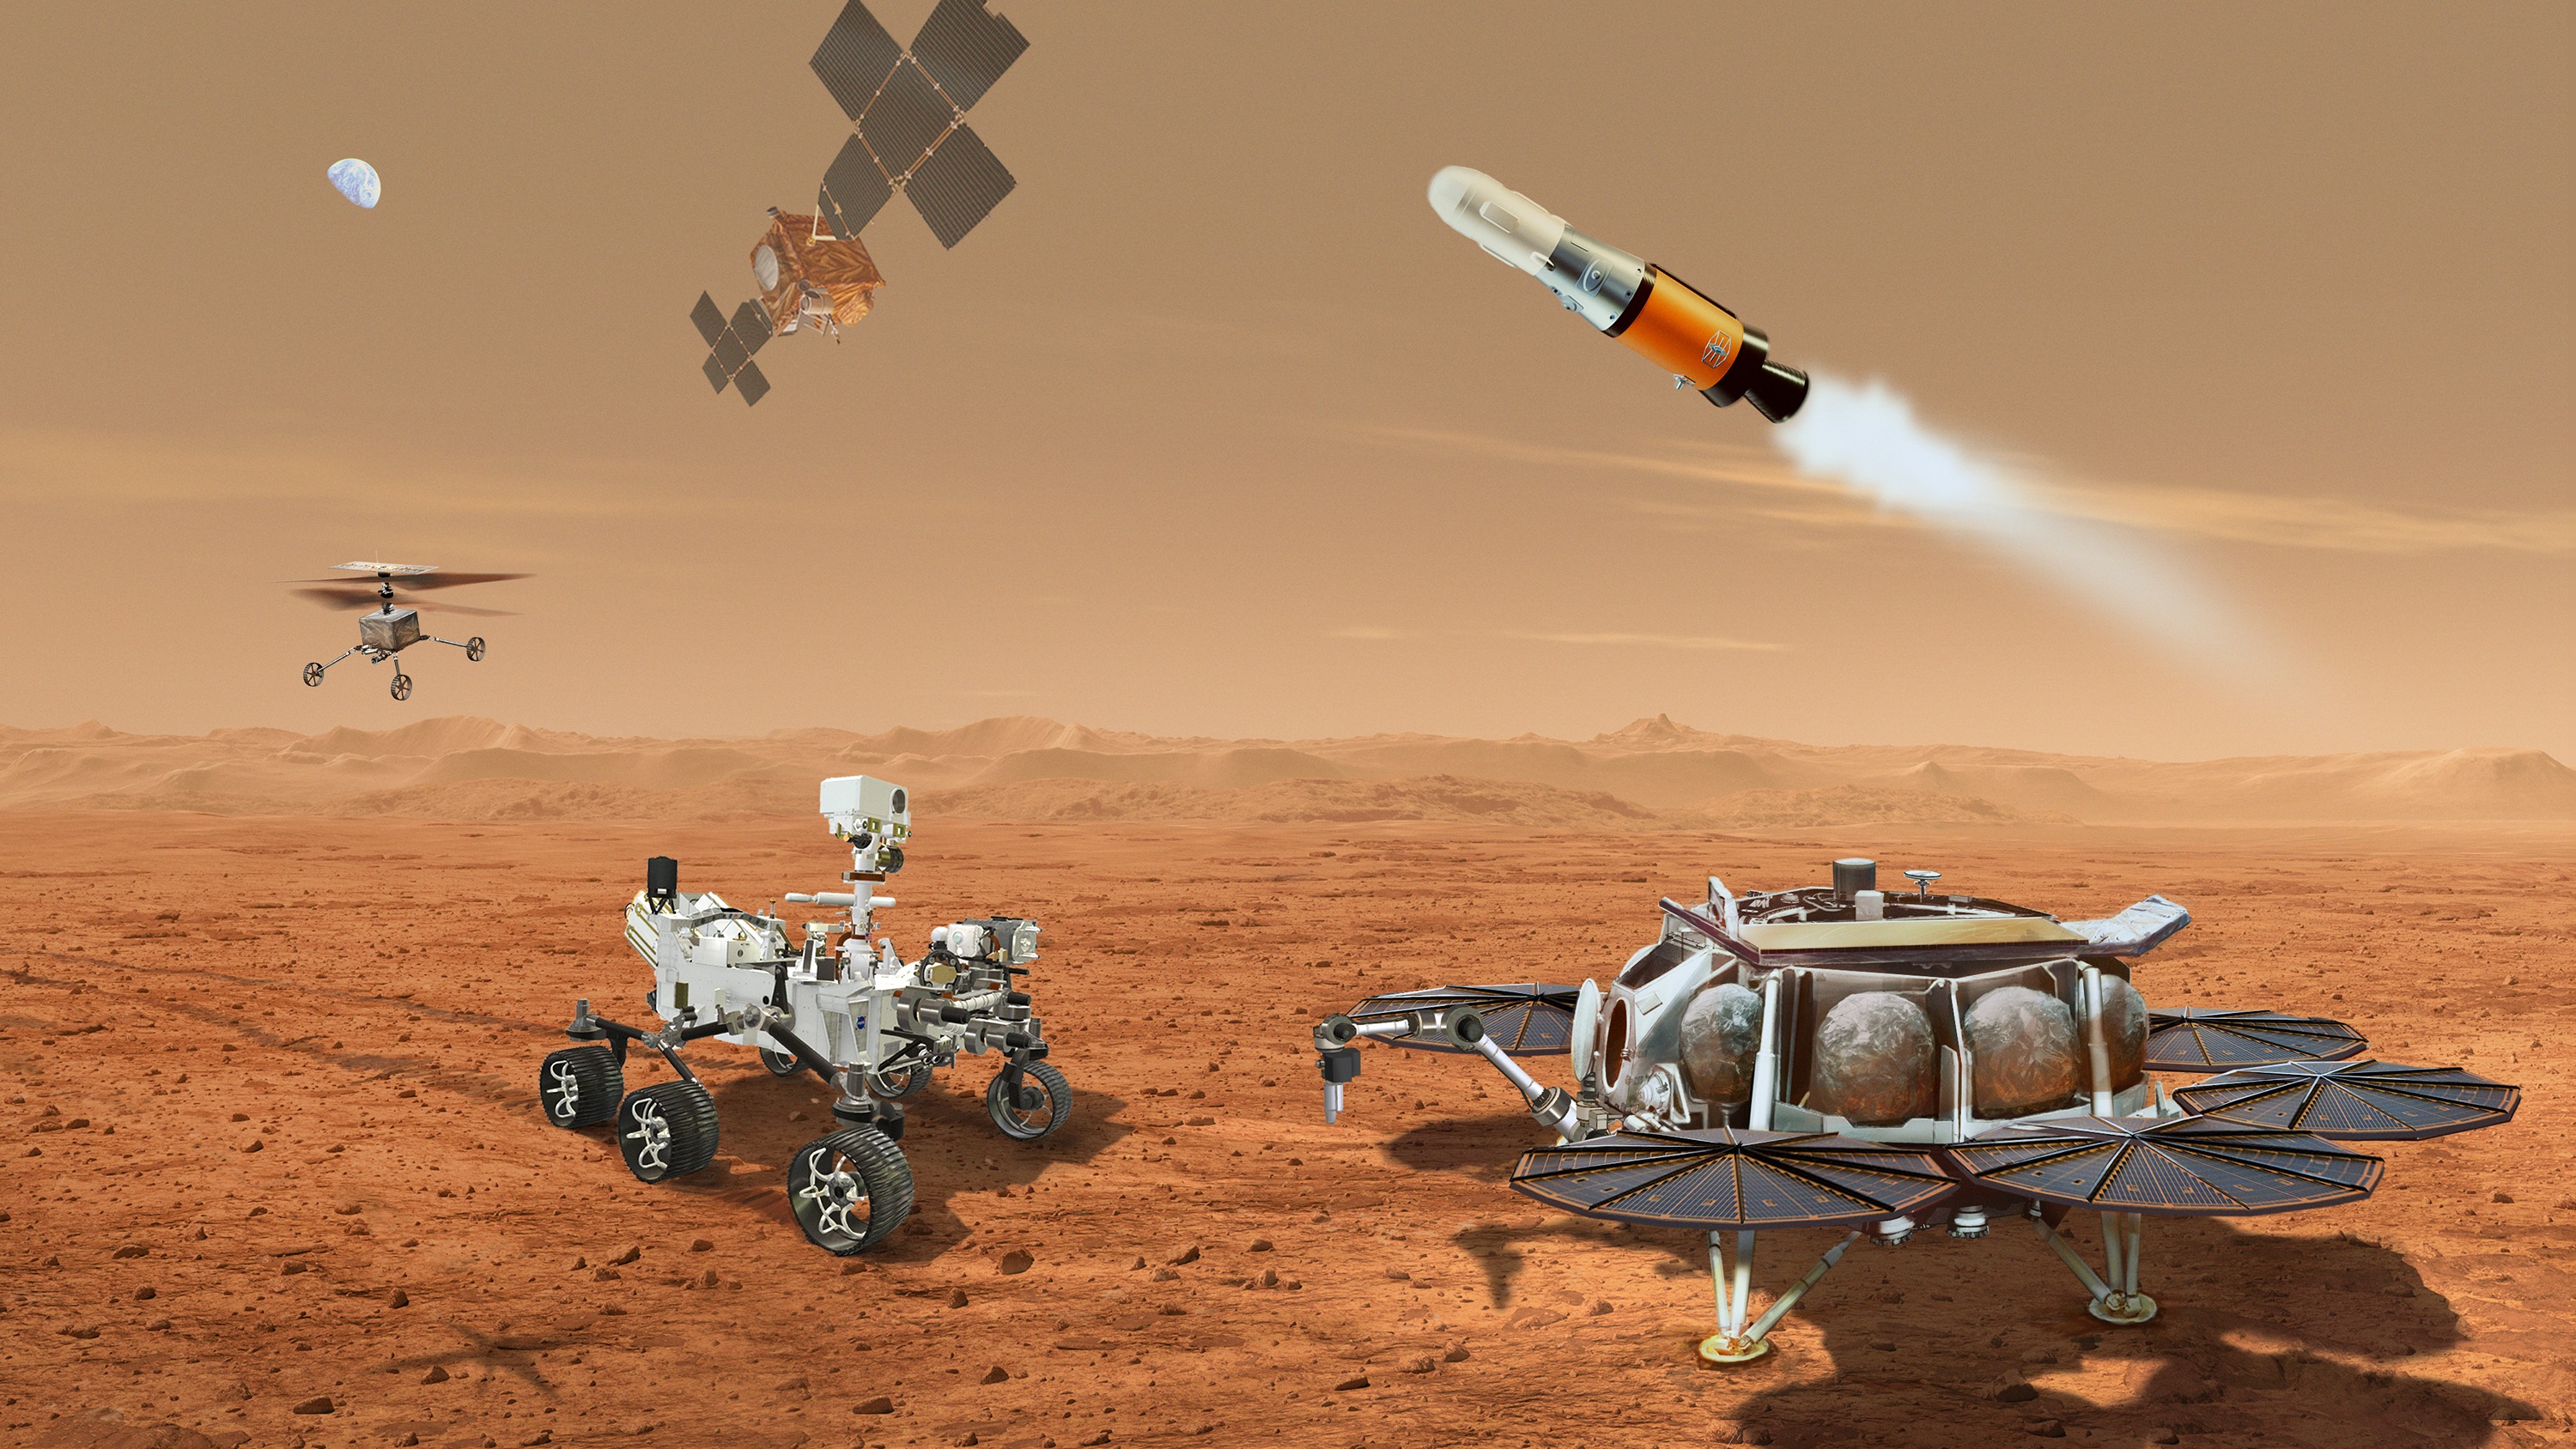 Artist's conception of the vehicles that would participate in a Mars sample return by NASA and the European Space Agency.